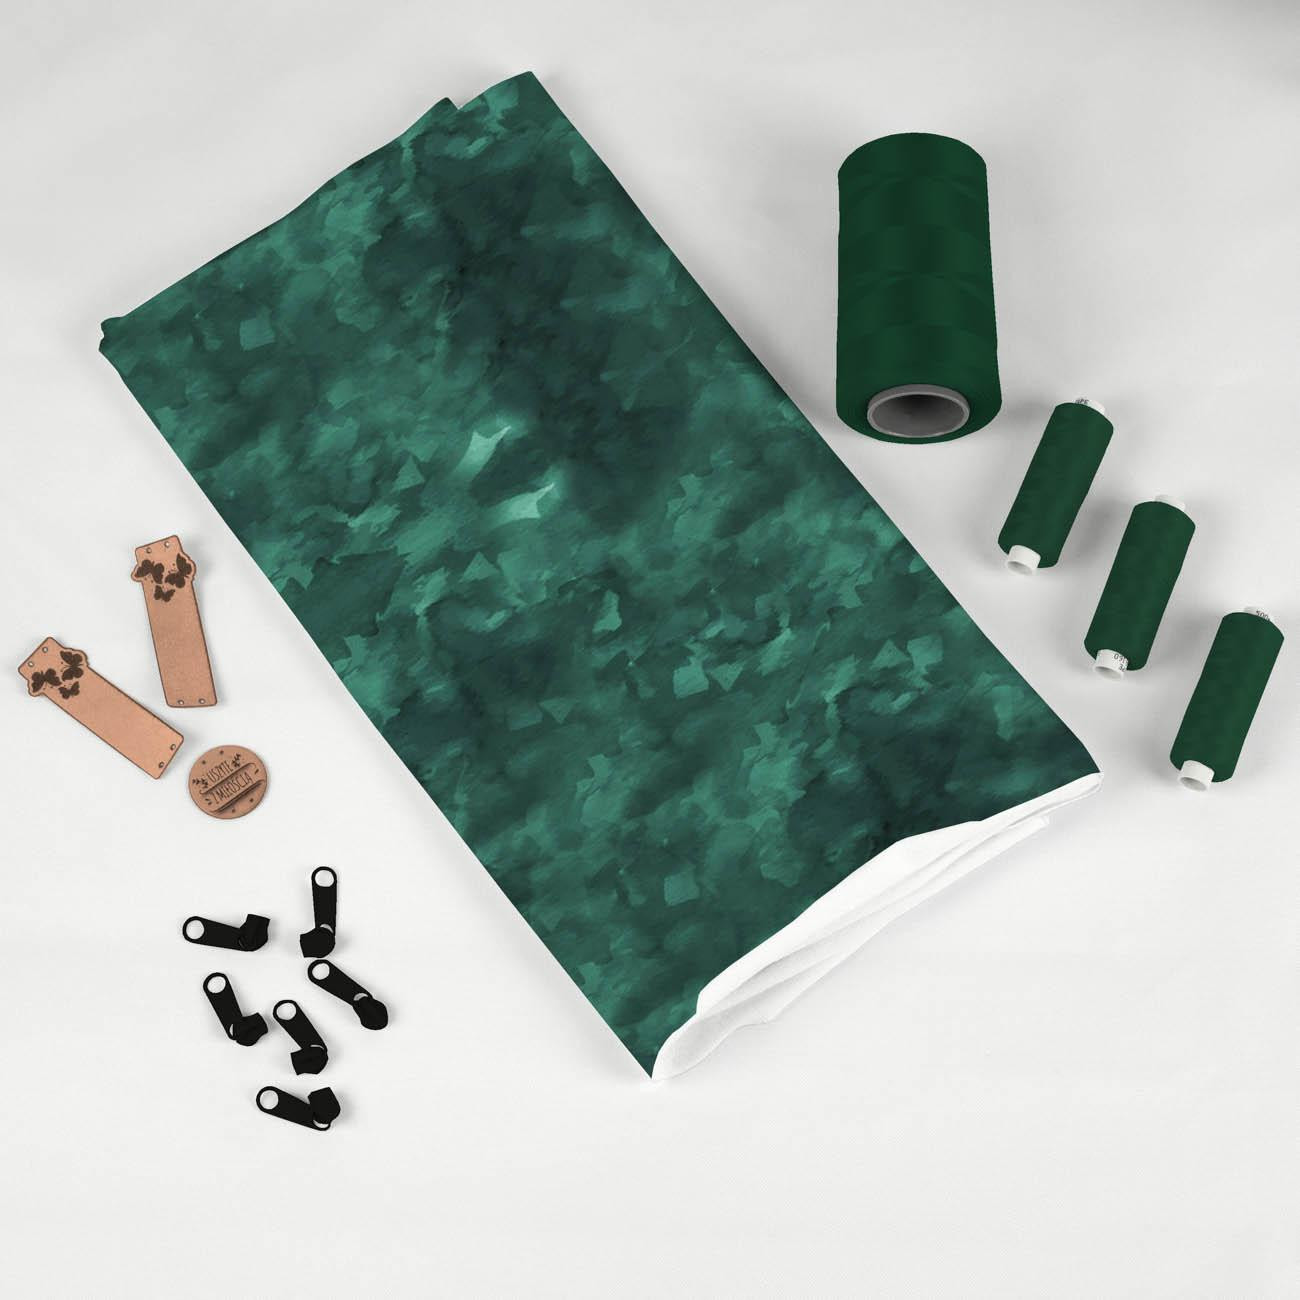 CAMOUFLAGE pat. 2 / bottled green - single jersey with elastane 